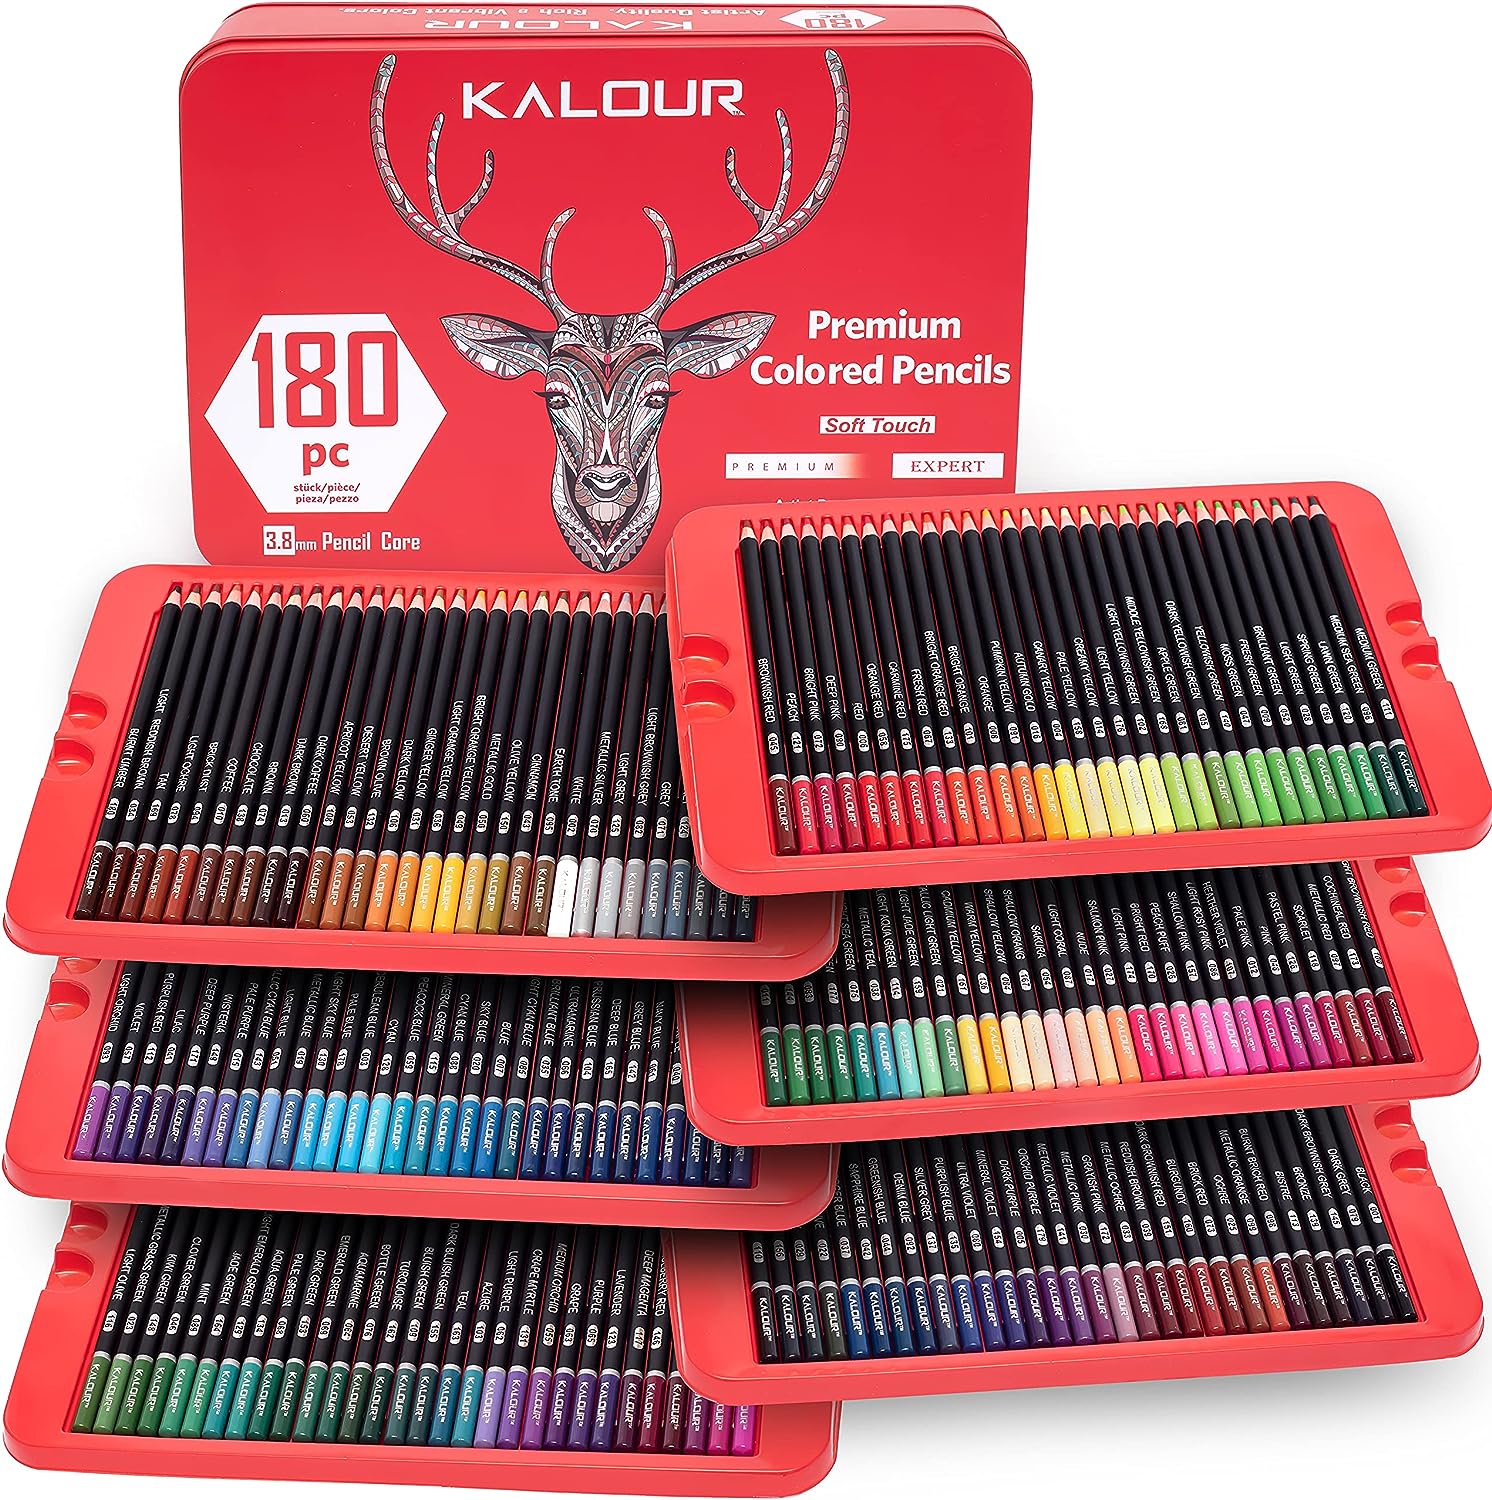 The New Kalour 520 Premium Colored Pencils, first look 